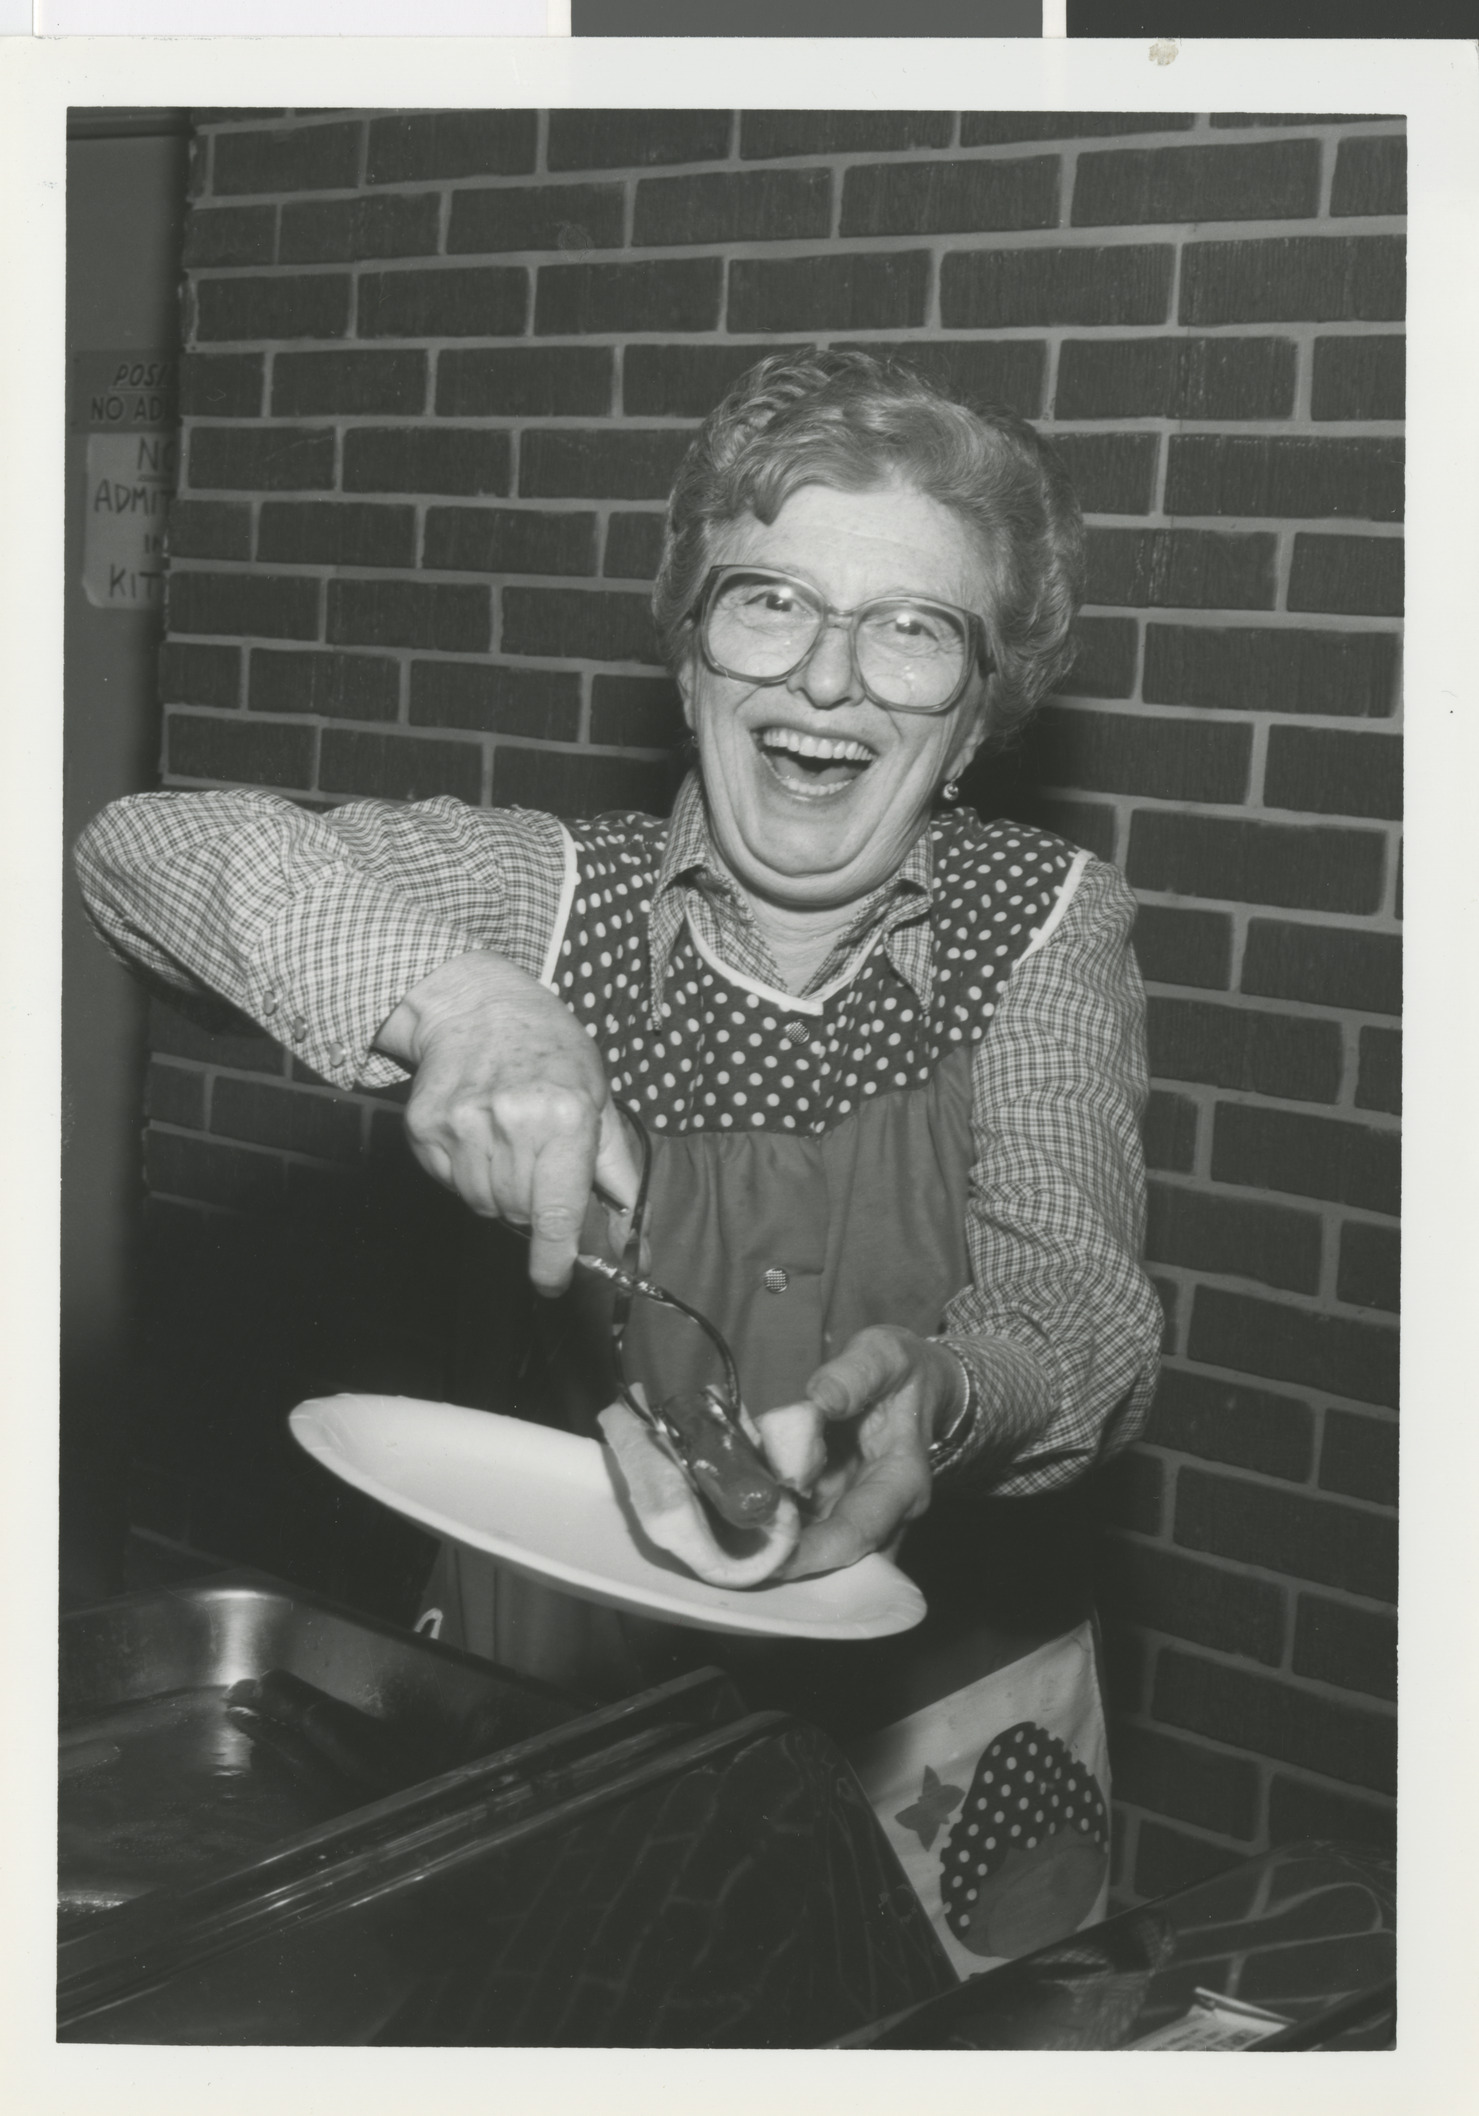 Photograph of a lady with a hotdog, 1980s